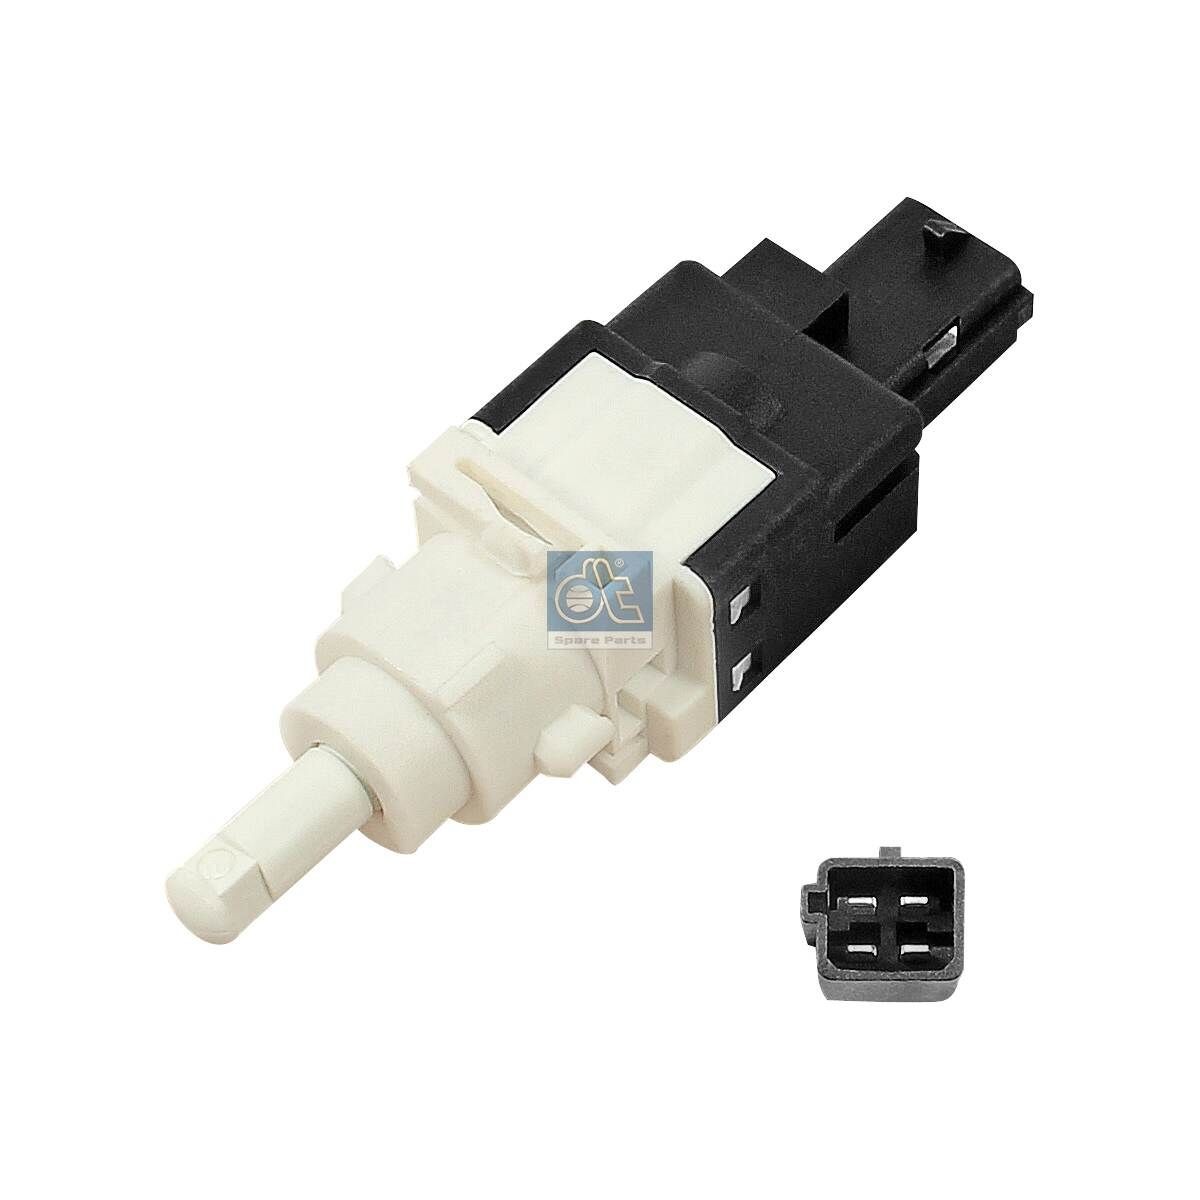 6DD 010 966-261 DT Spare Parts Mechanical, 4-pin connector Number of pins: 4-pin connector Stop light switch 12.71025 buy